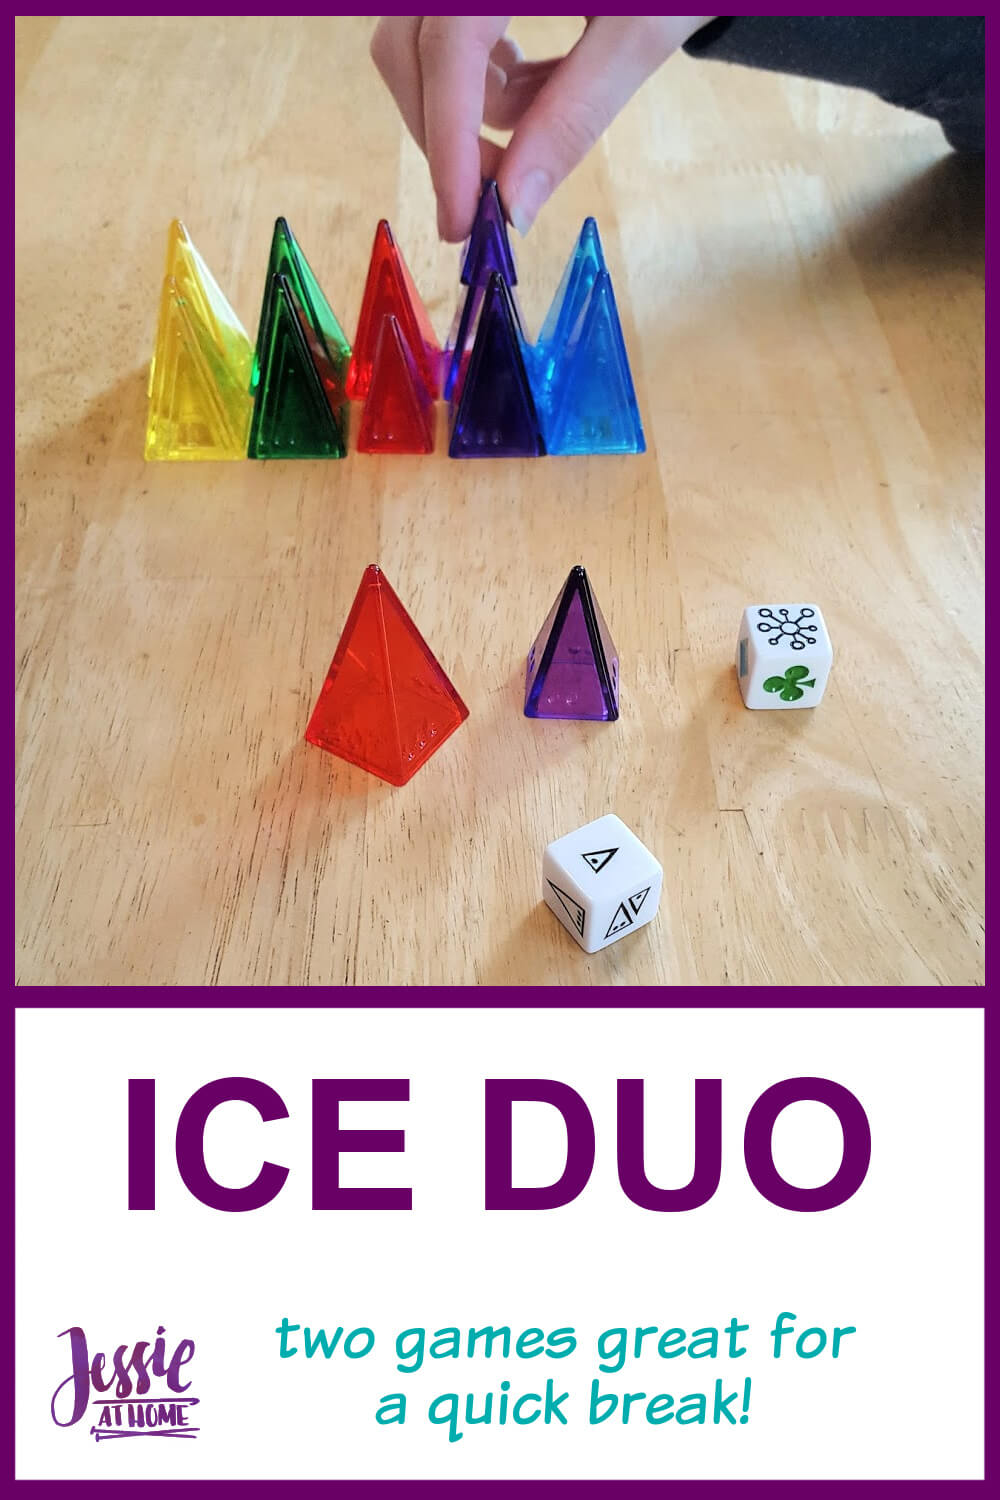 Ice Duo - two games that are great for a quick break!